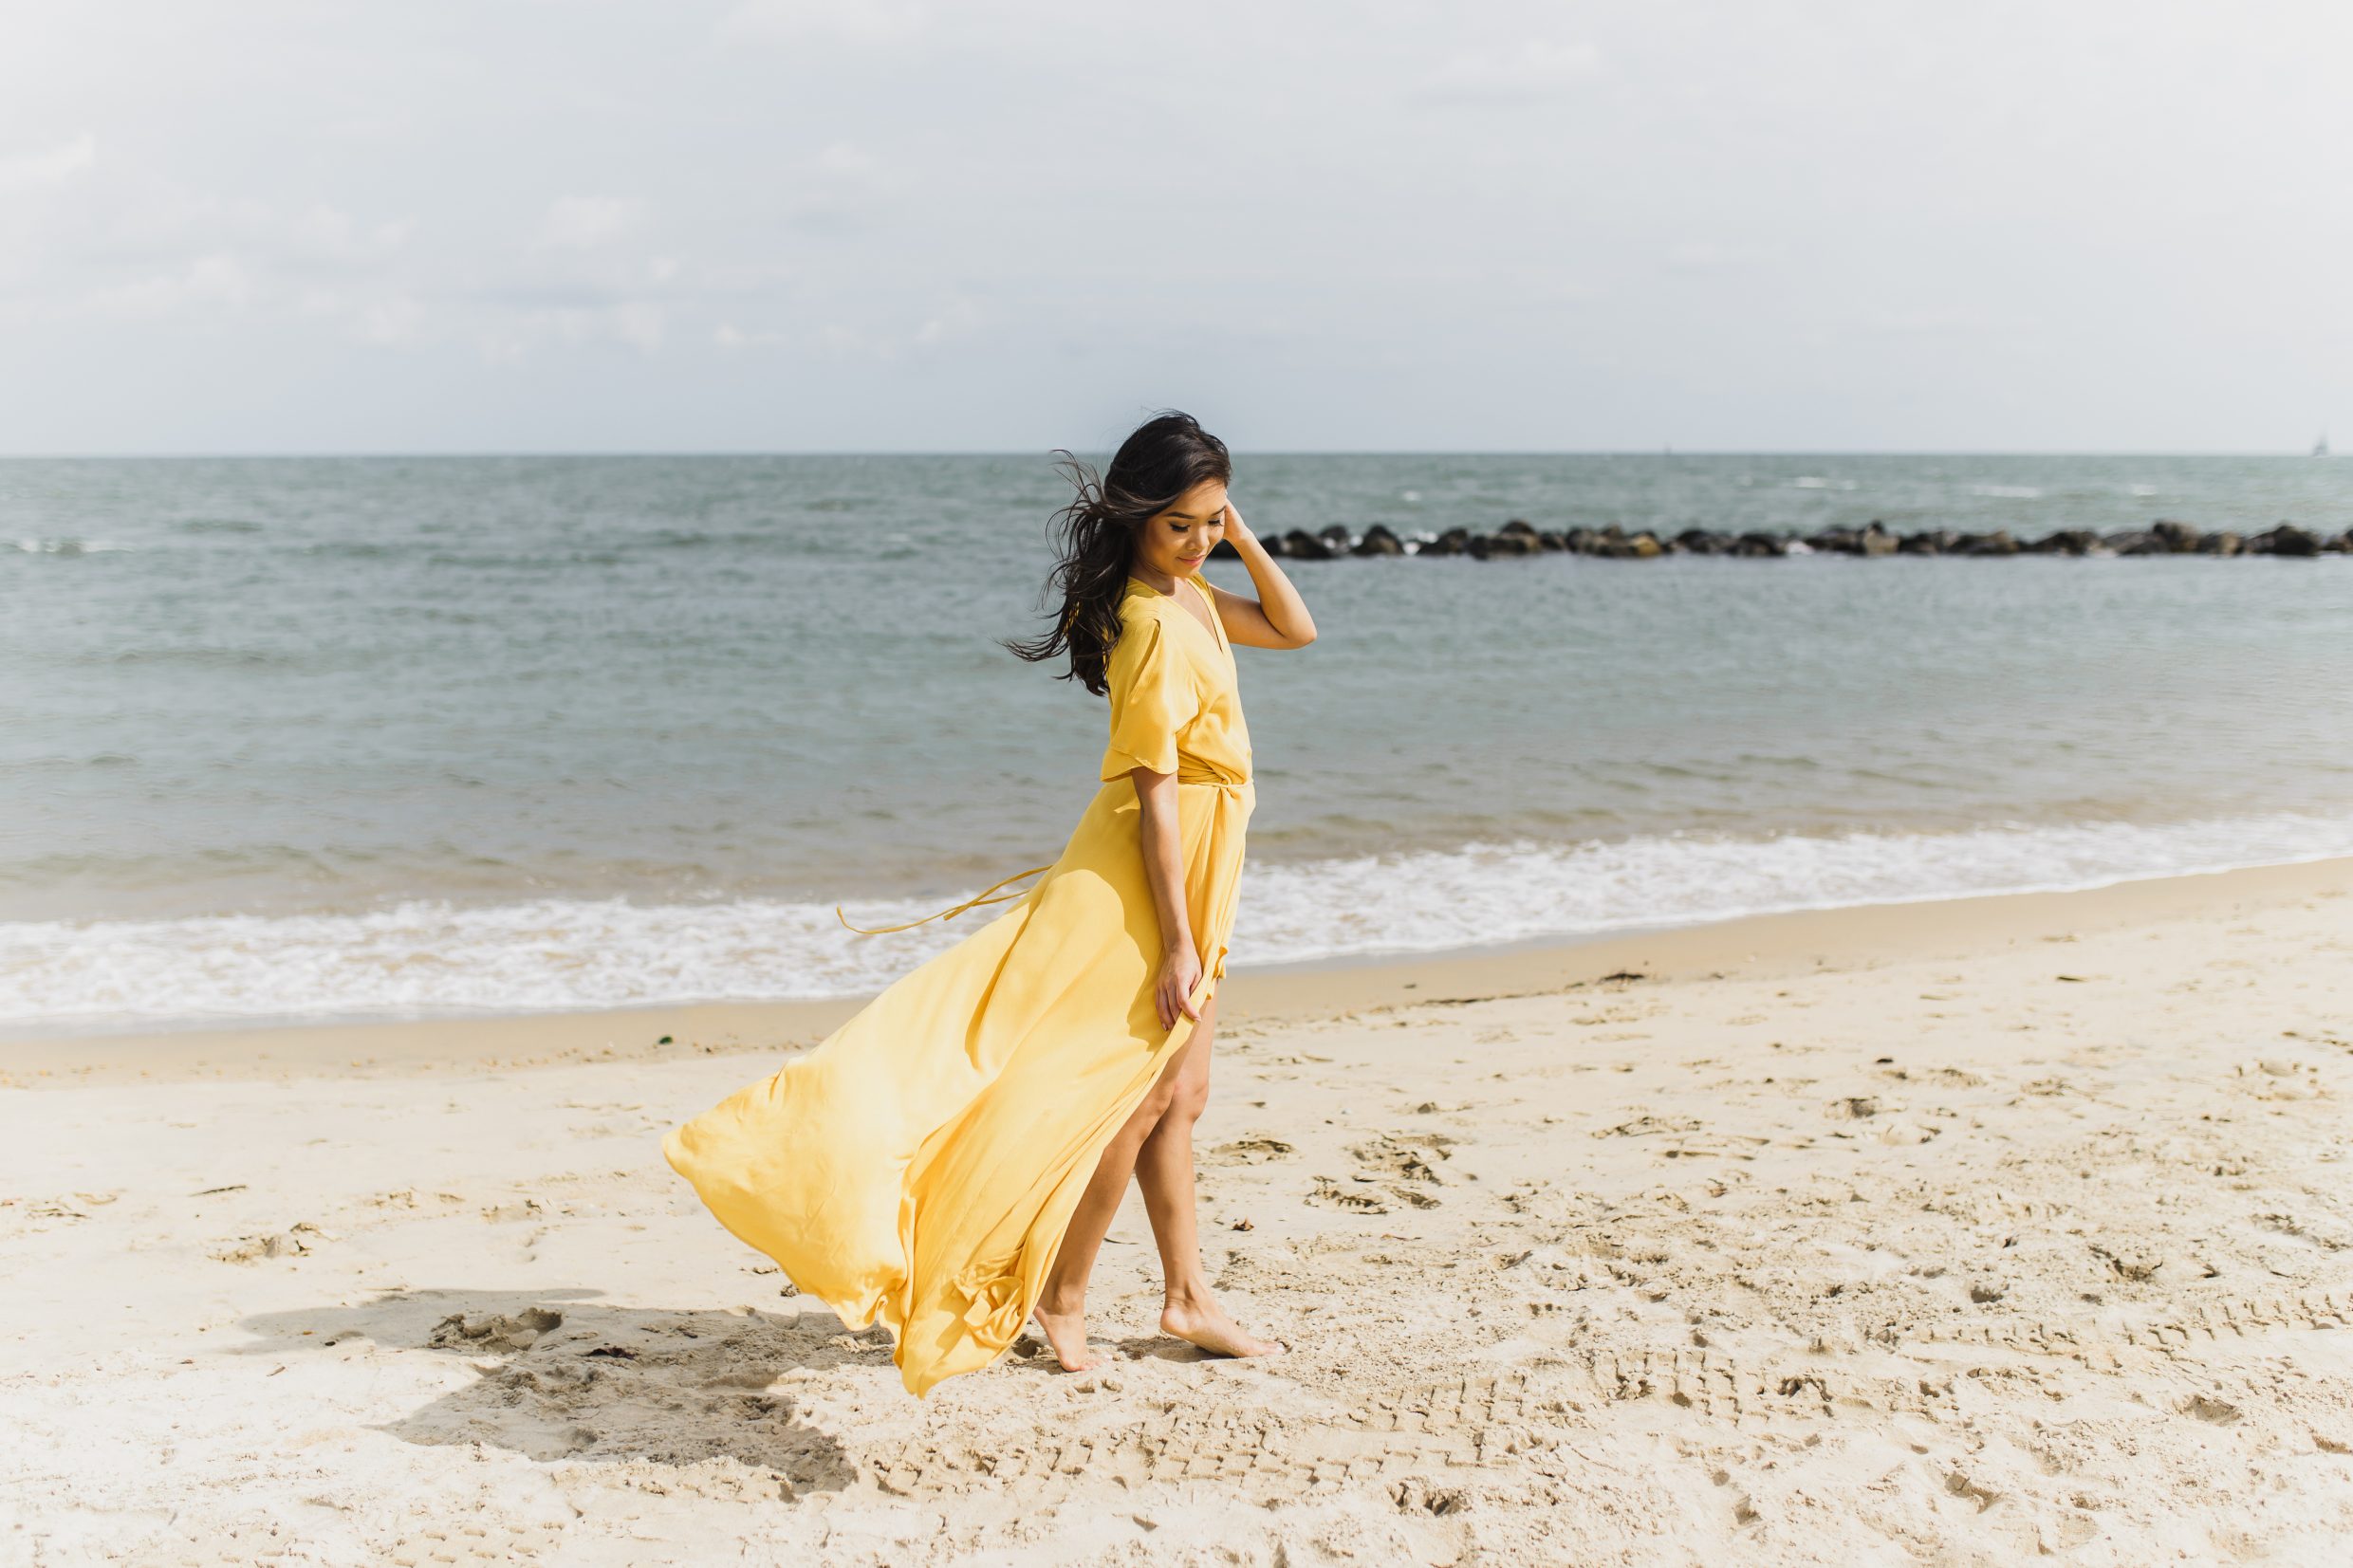 COLOR & CHIC | Yellow wrap maxi dress at the beach